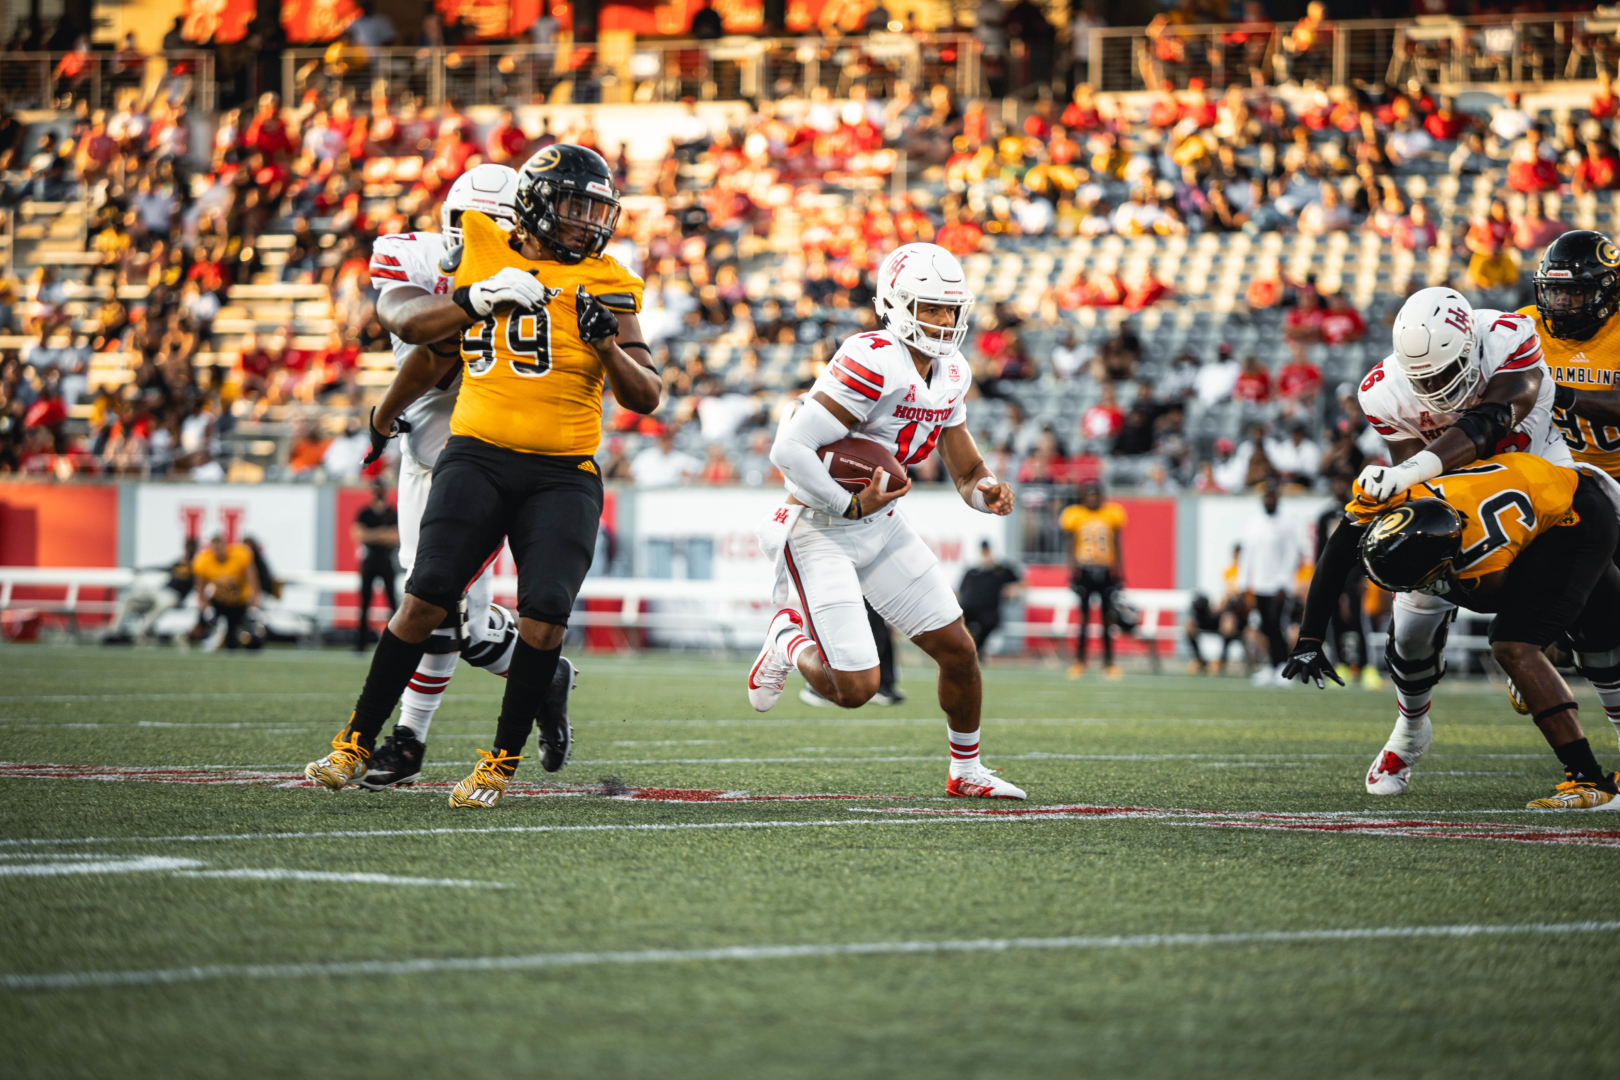 After years of waiting his turn, junior quarterback Ike Ogbogu finally got his turn to show what he can do Saturday night in UH's route of Grambling State. | James Schillinger/The Cougar